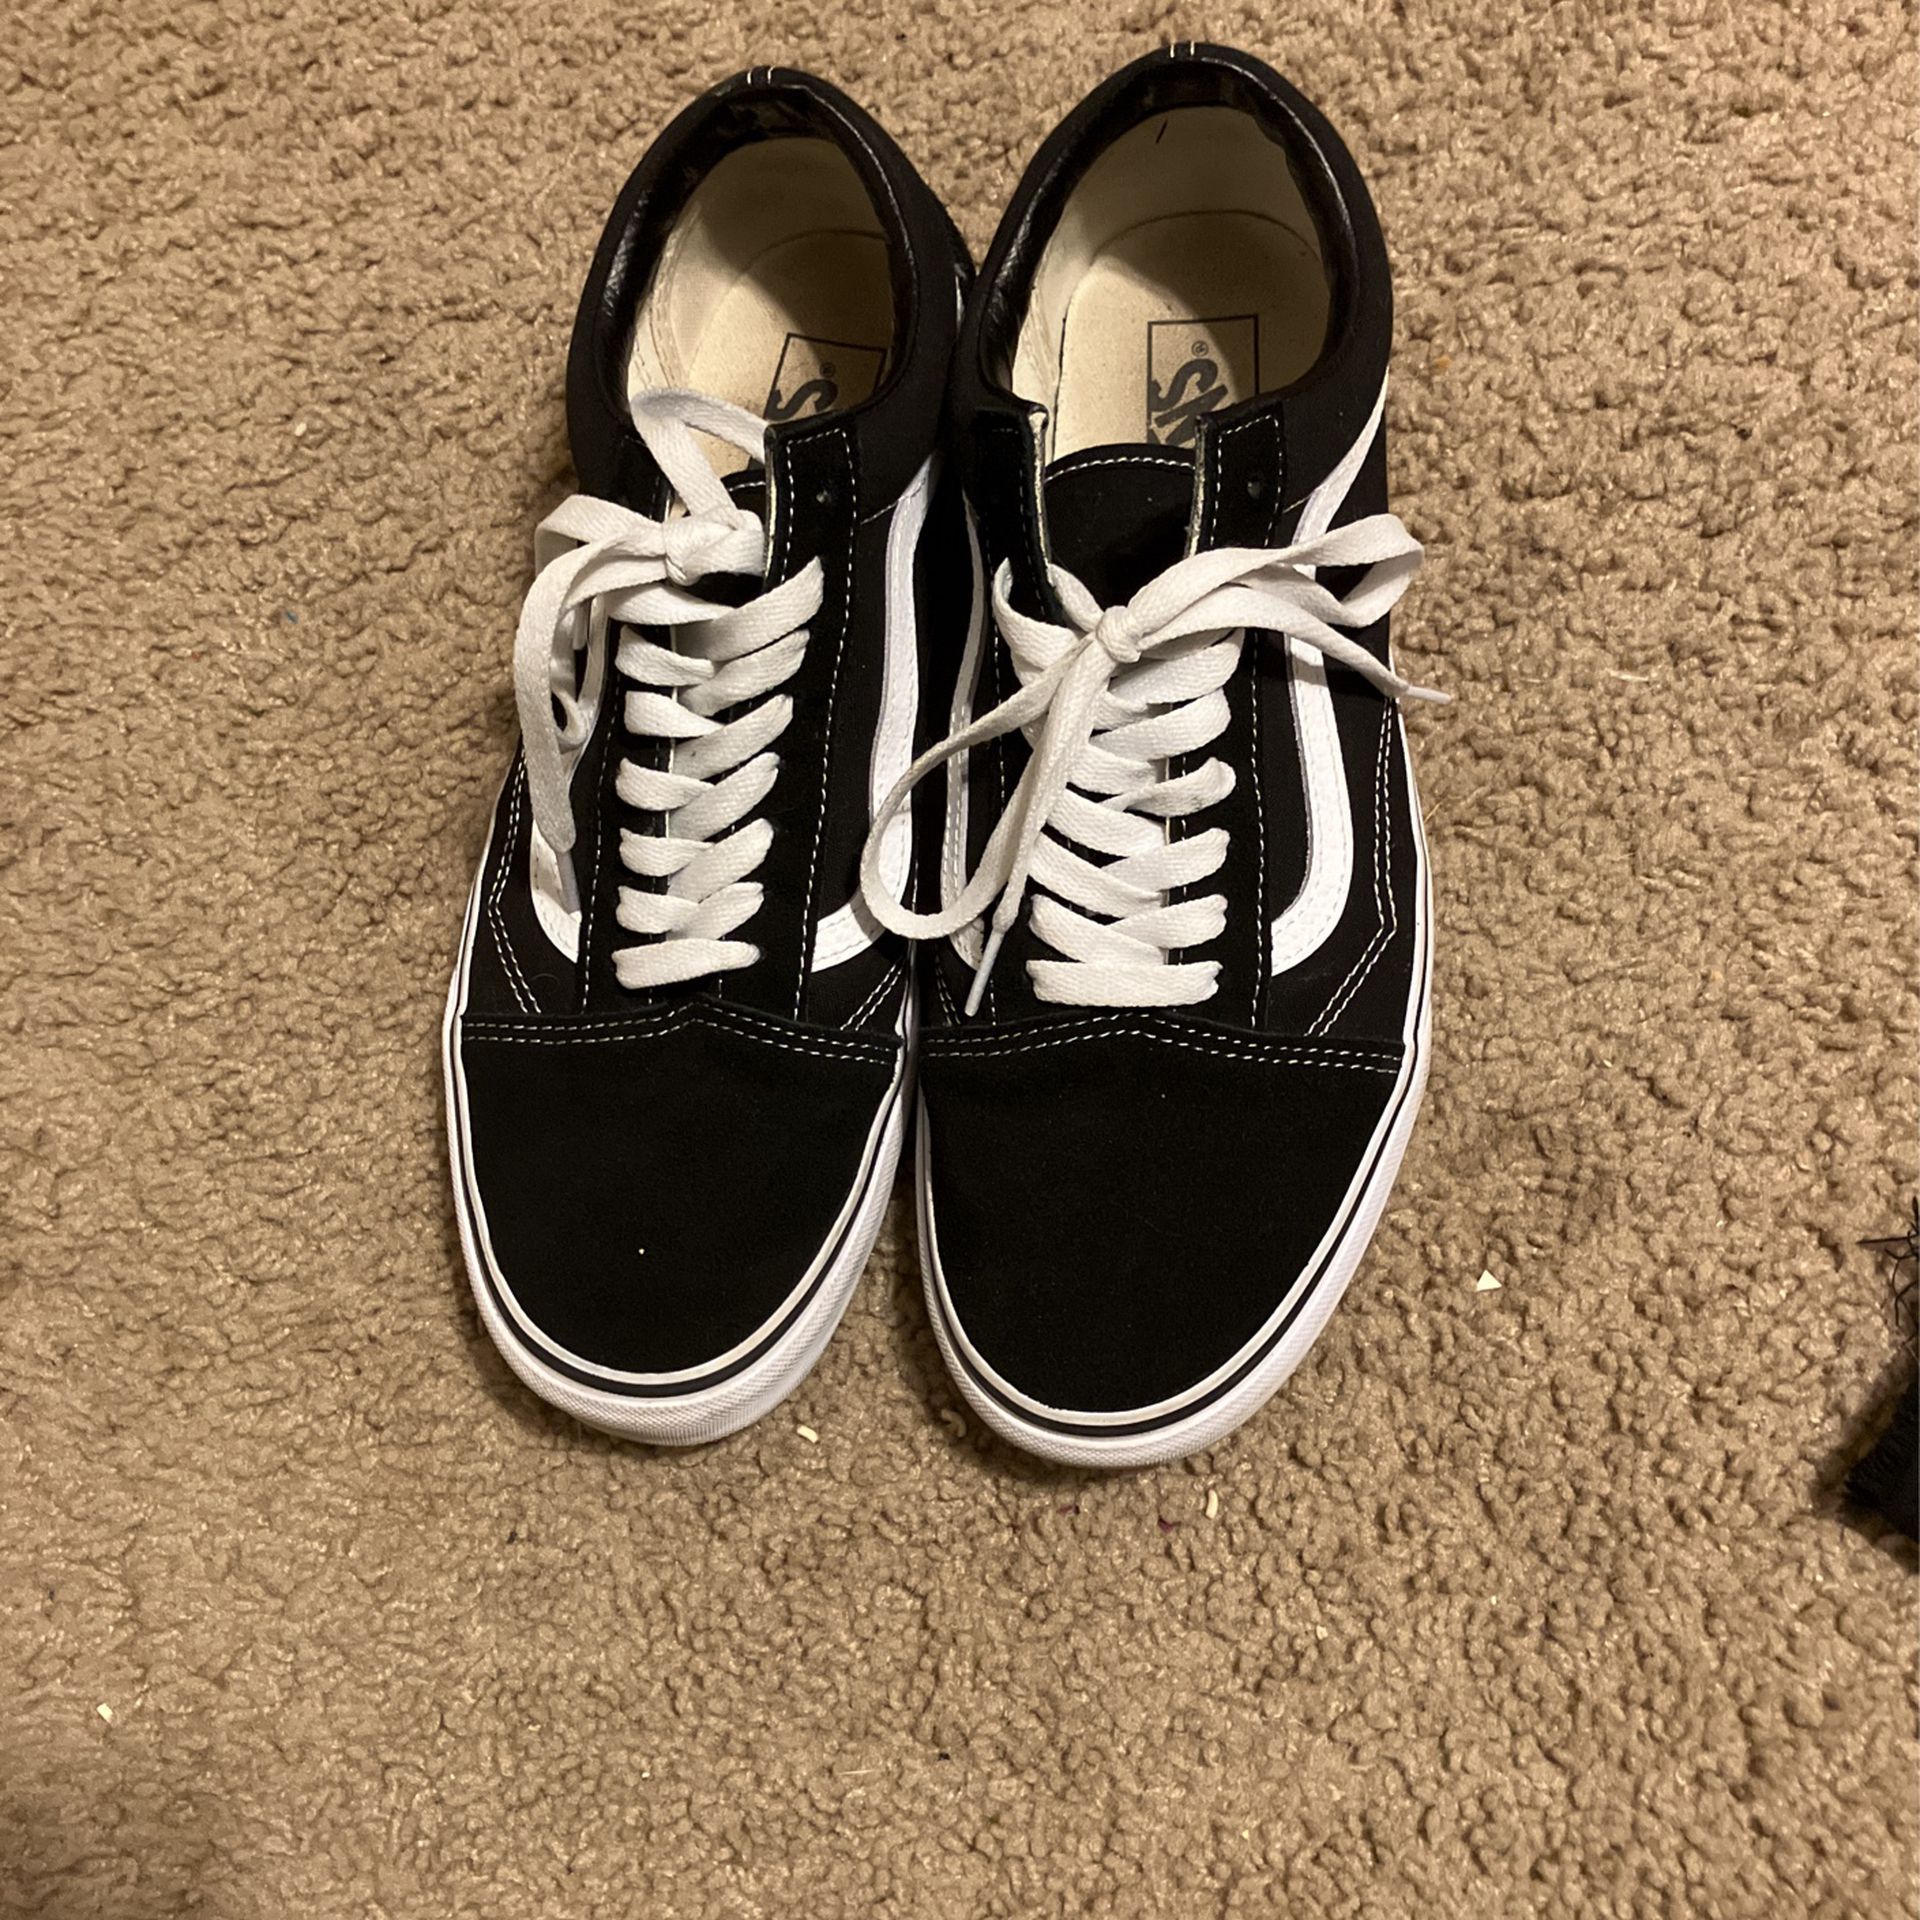 Shoes Black And White Vans 